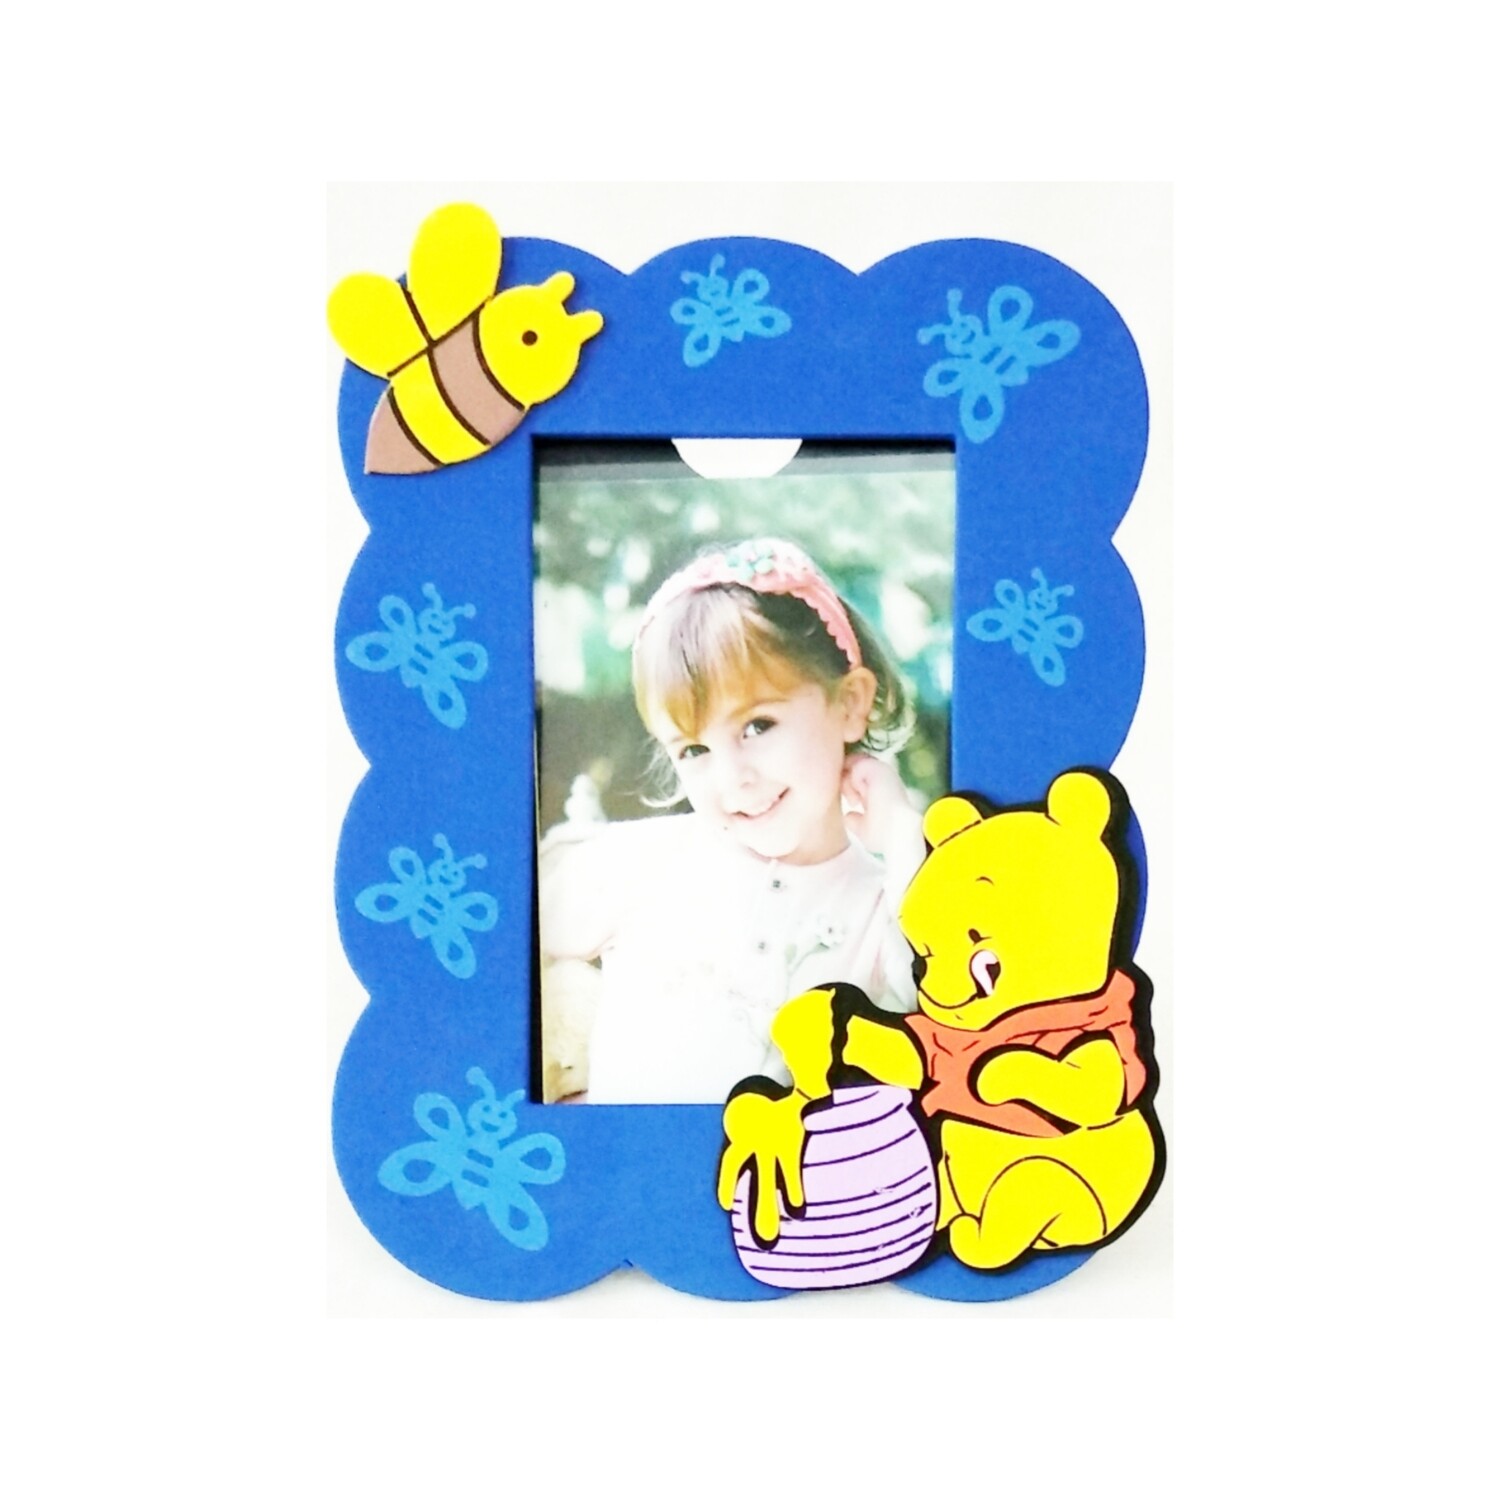 4X6 Inch Table Photo Frame (Random Color and Design)